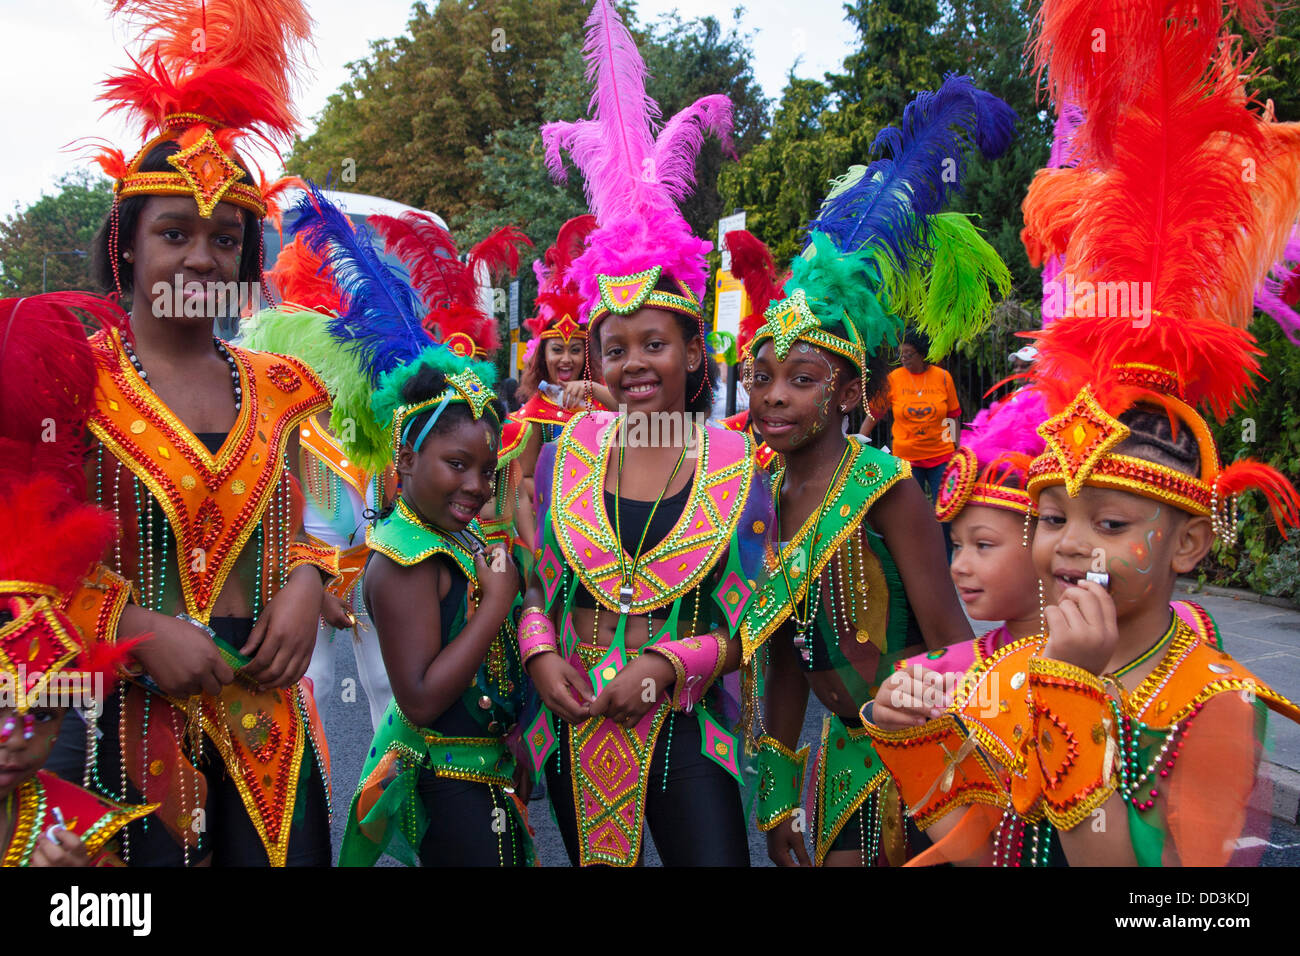 London, UK. 25th Aug, 2013. Girls wait for the procession to begin as the annual two-day Notting Hill Carnival celebrating Afro-Carribean culture and London's ethnic diversity gets underway. Credit:  Paul Davey/Alamy Live News Stock Photo